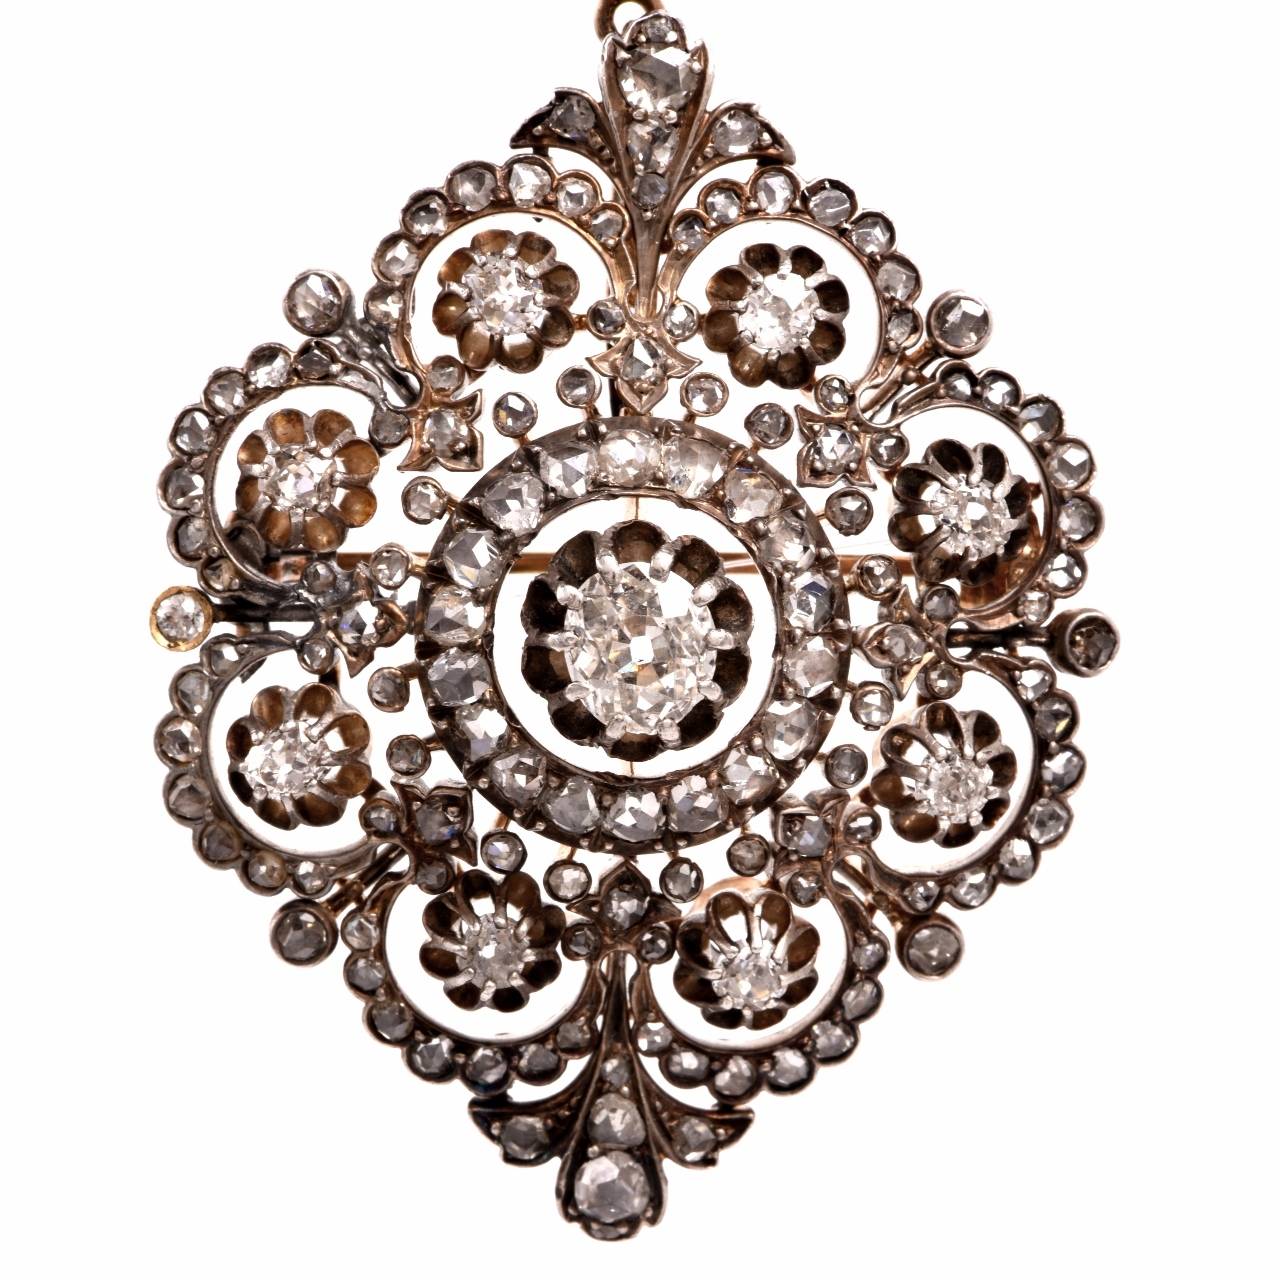 This fascinating antique pendant and brooch from the Georgian era is crafted in silver-topped yellow gold, weighing 24.3 grams and measuring 2.6